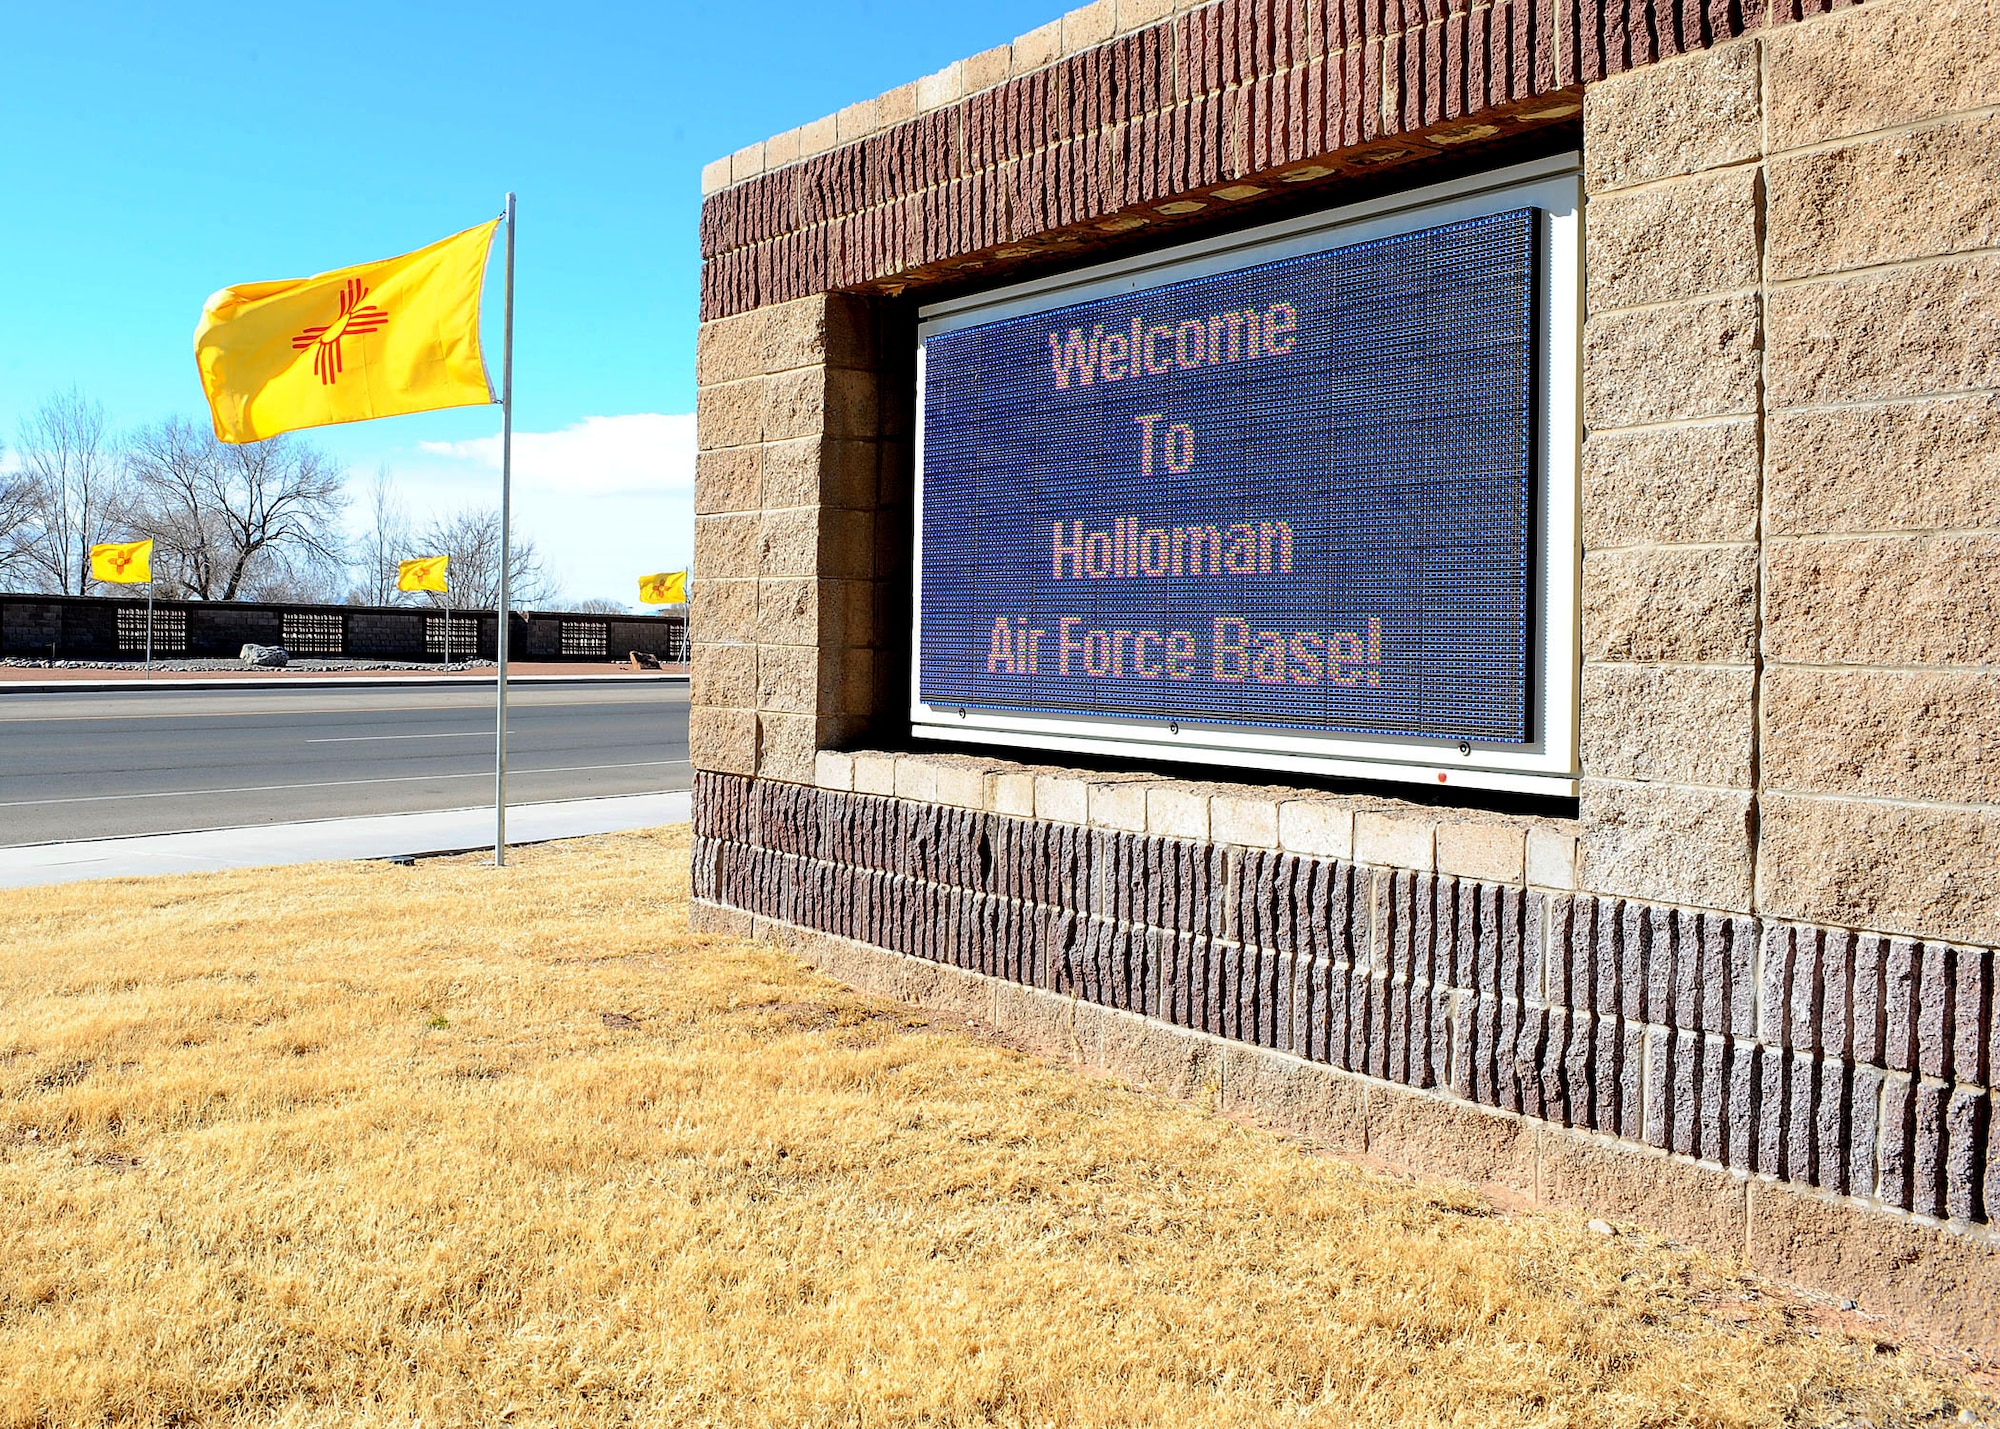 The New Mexico flag waves in the breeze on Jan. 6, 2009, at the front gate of Holloman Air Force Base. The flags replaced the normal presentation of U.S. Flags, New Mexico state flags and German flags in honor of New Mexico?s admittance into the union on Jan. 6, 1912. (U.S. Air Force photo/Airman 1st Class Deandre Curtiss)